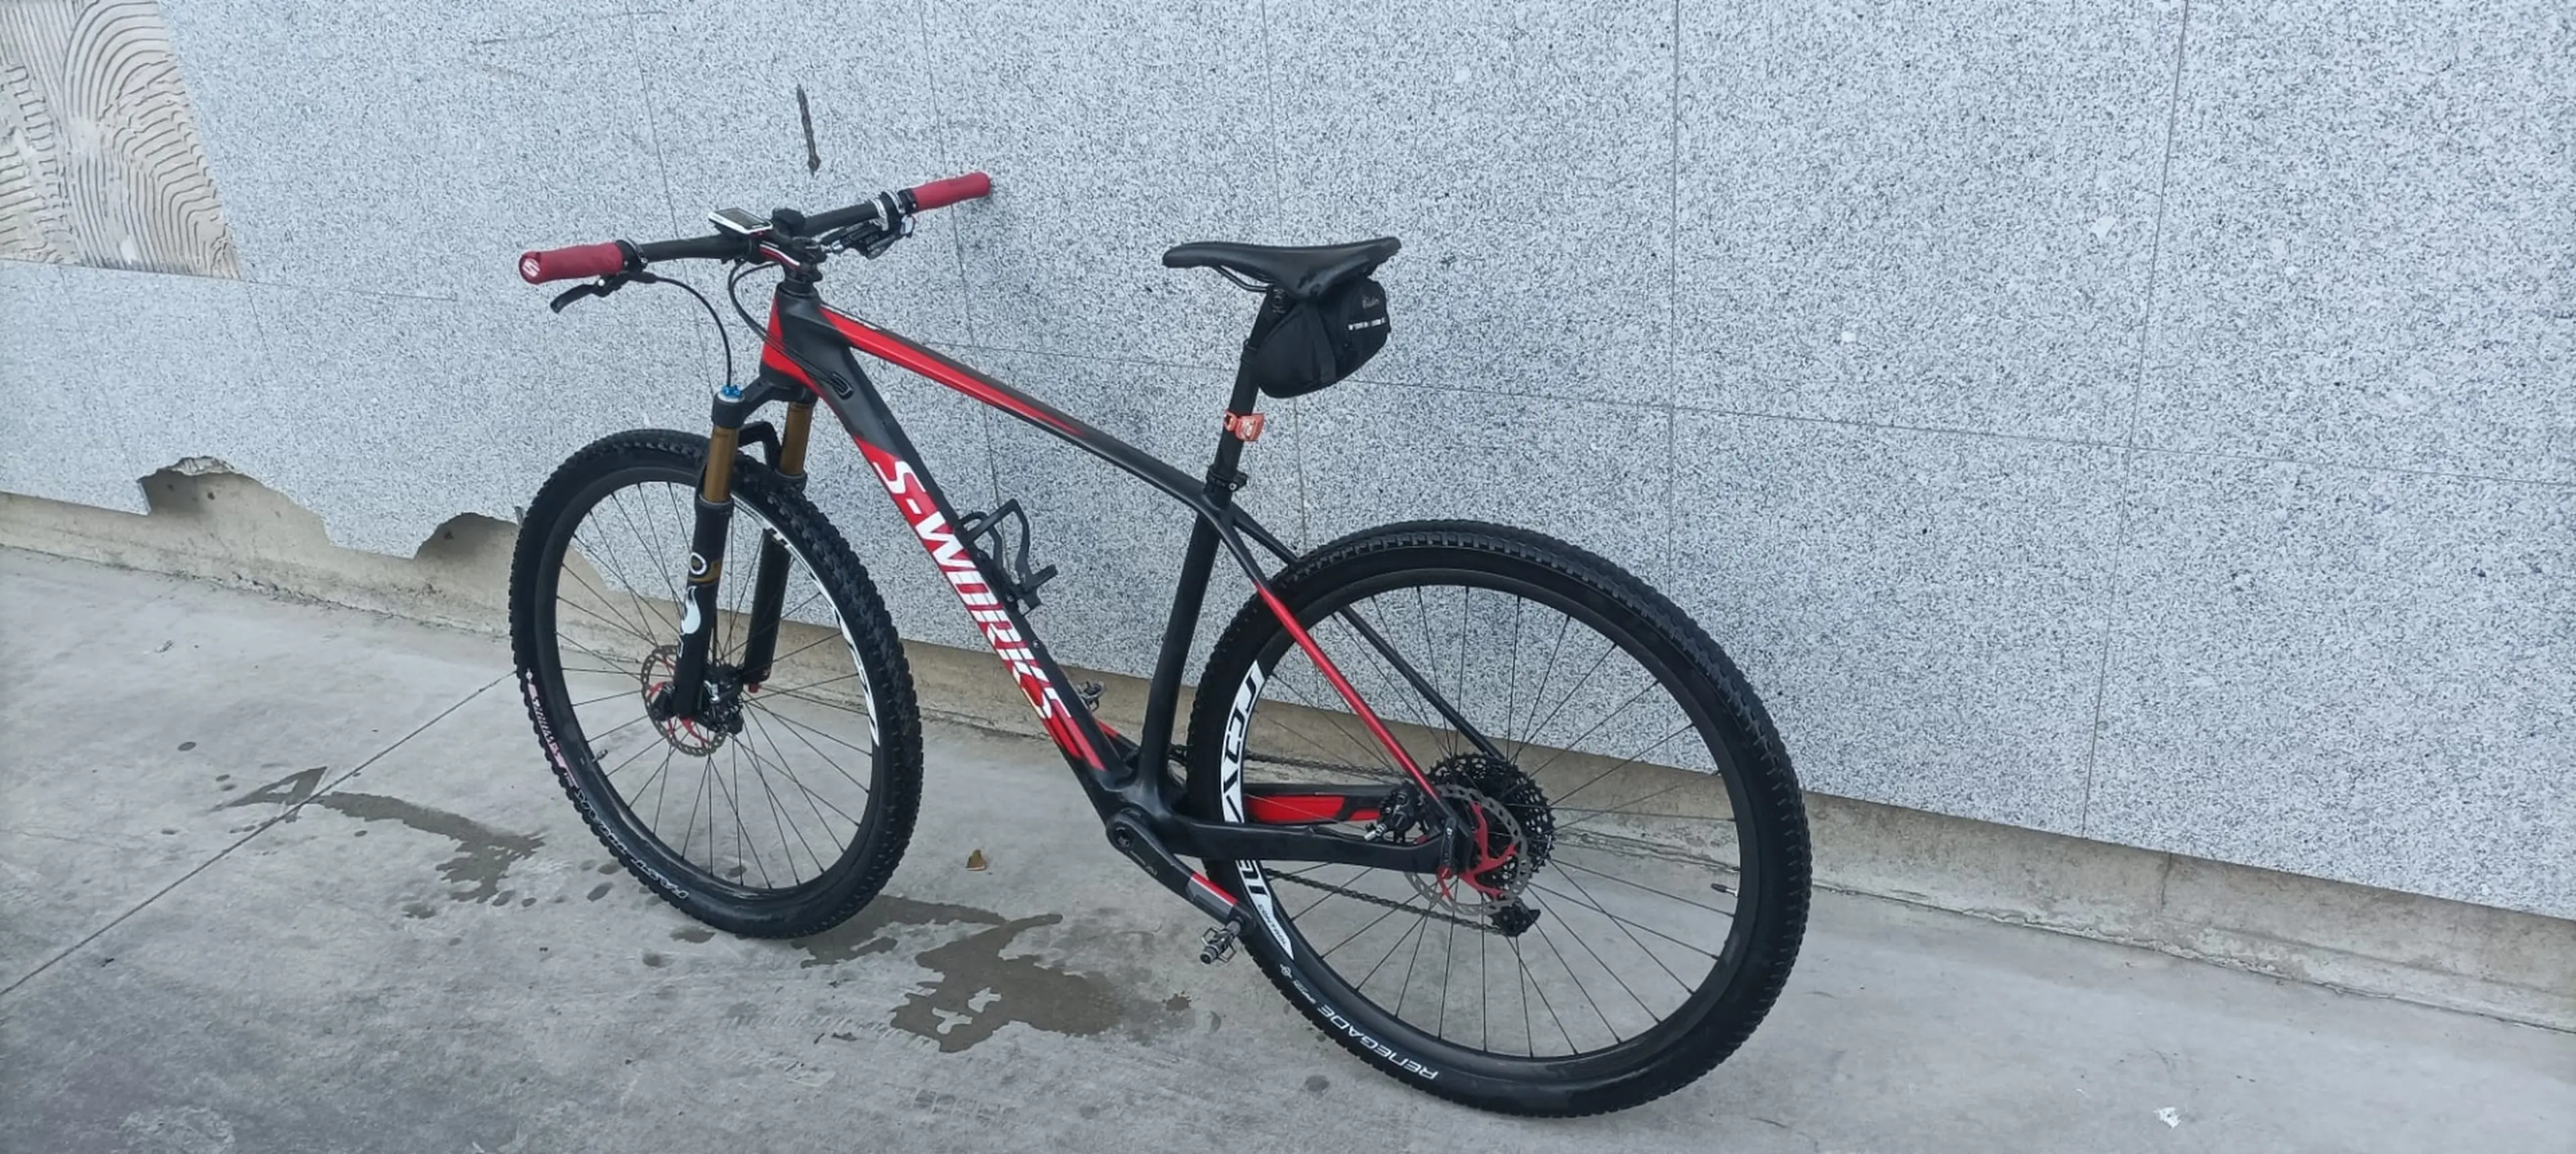 8. Specialized stumpjumper S-Works